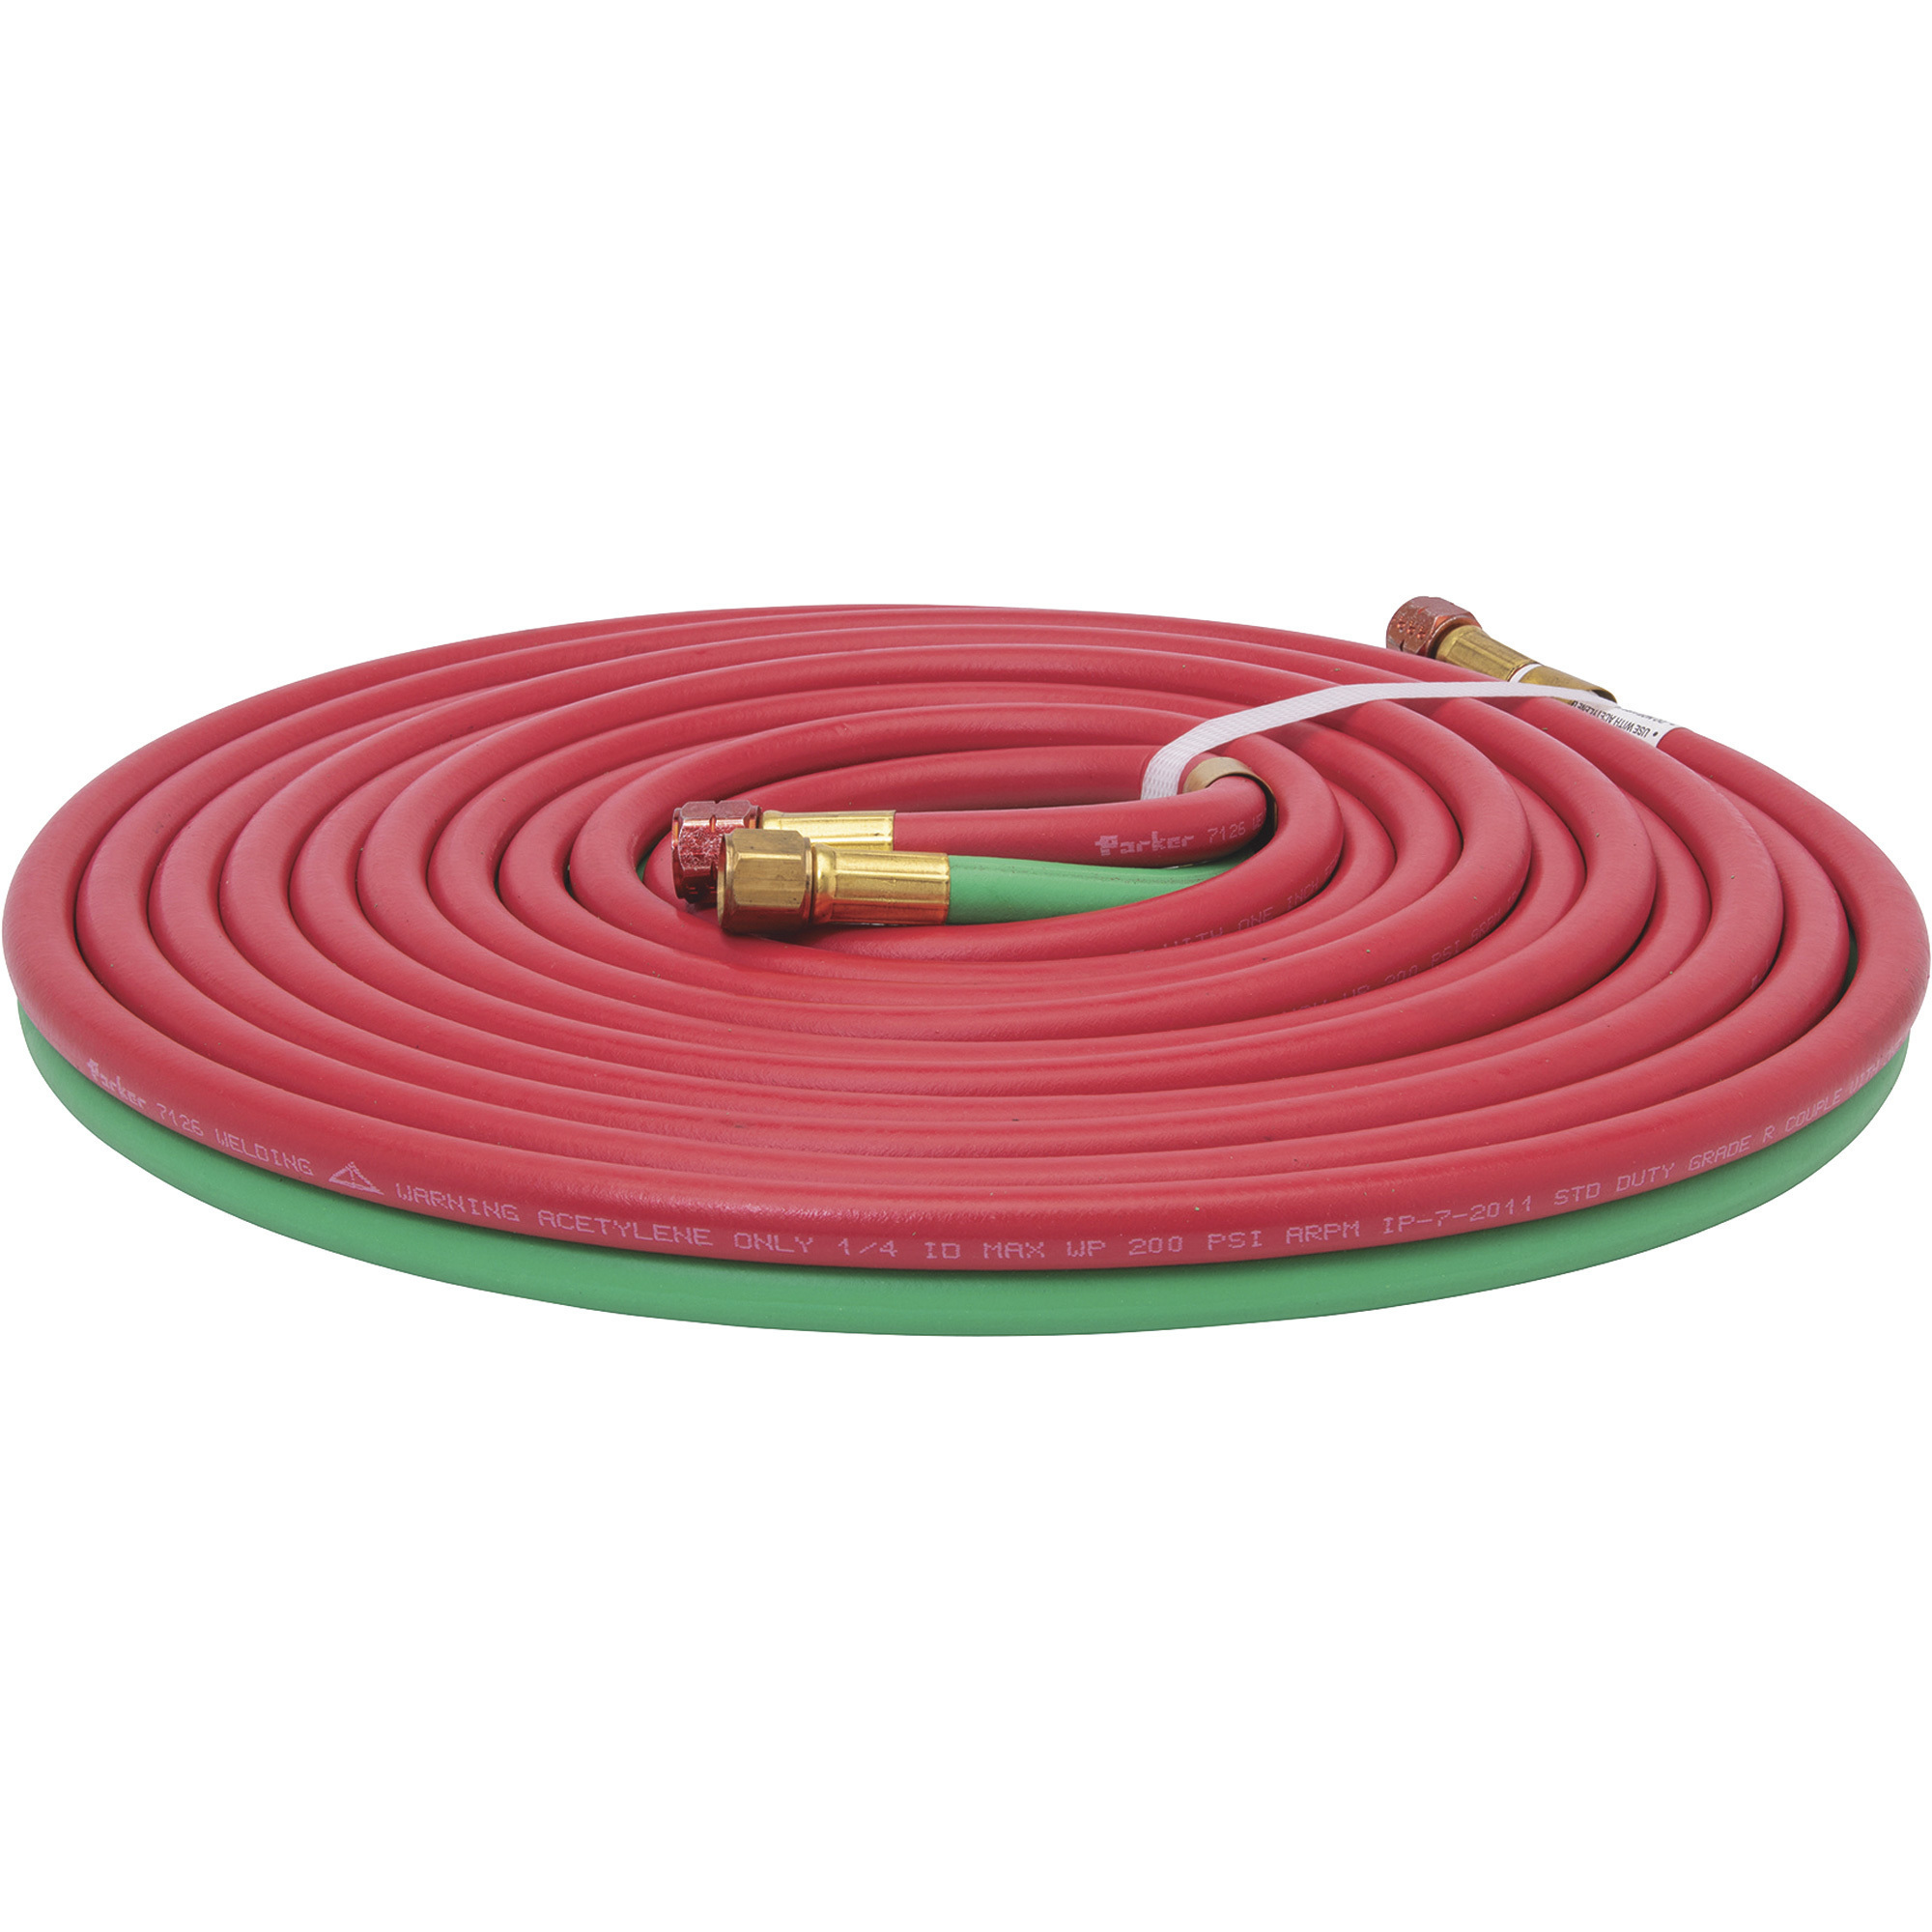 Lincoln Electric Oxy-Acetylene Hose, 1/4in. Dia. x 25ft.L, 100 PSI, Model#  KH578